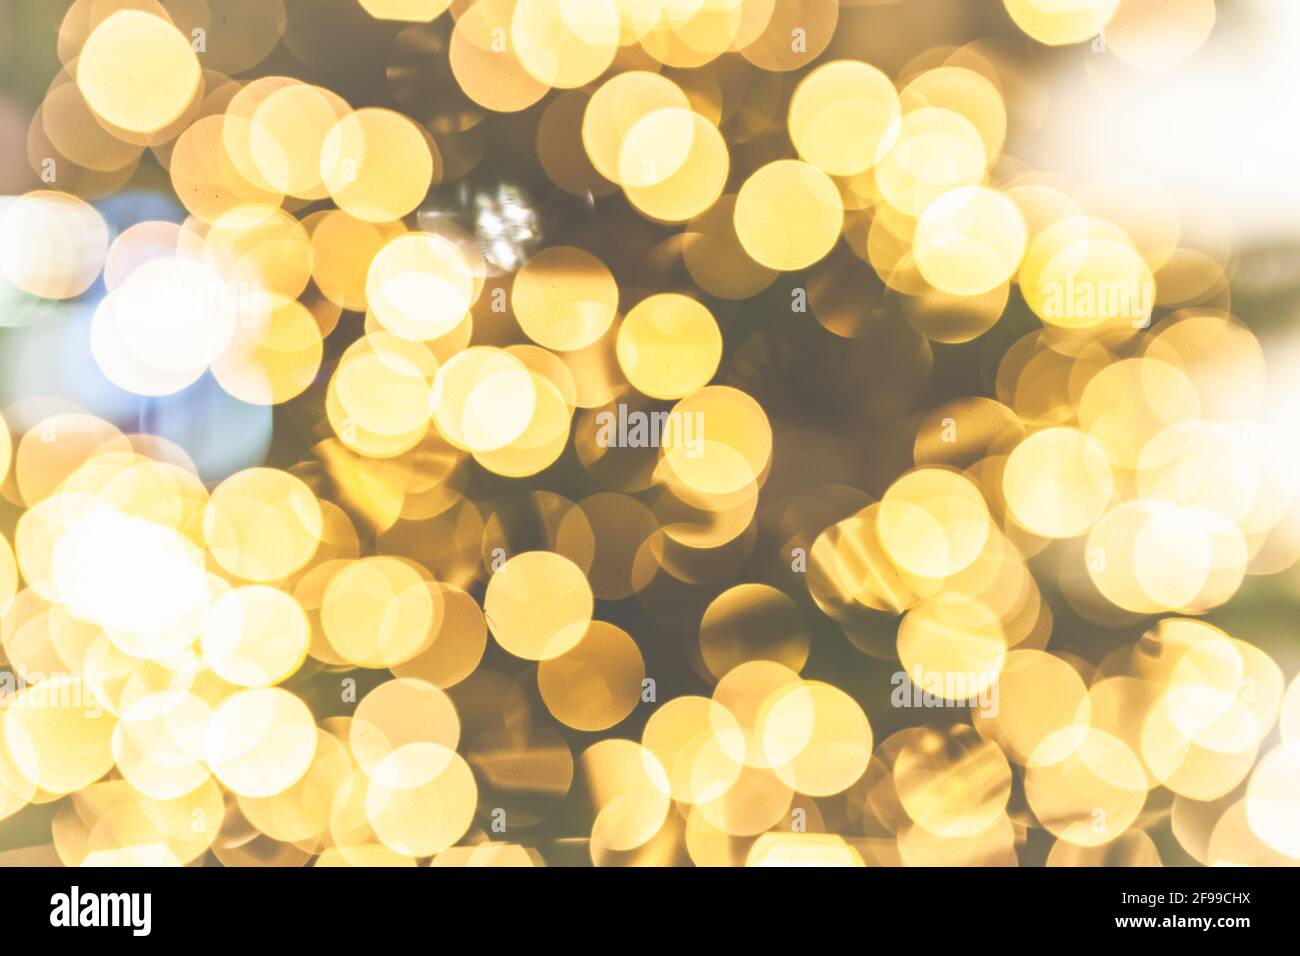 Warm lighting for party or Christmas with lens flares and blur, template Stock Photo